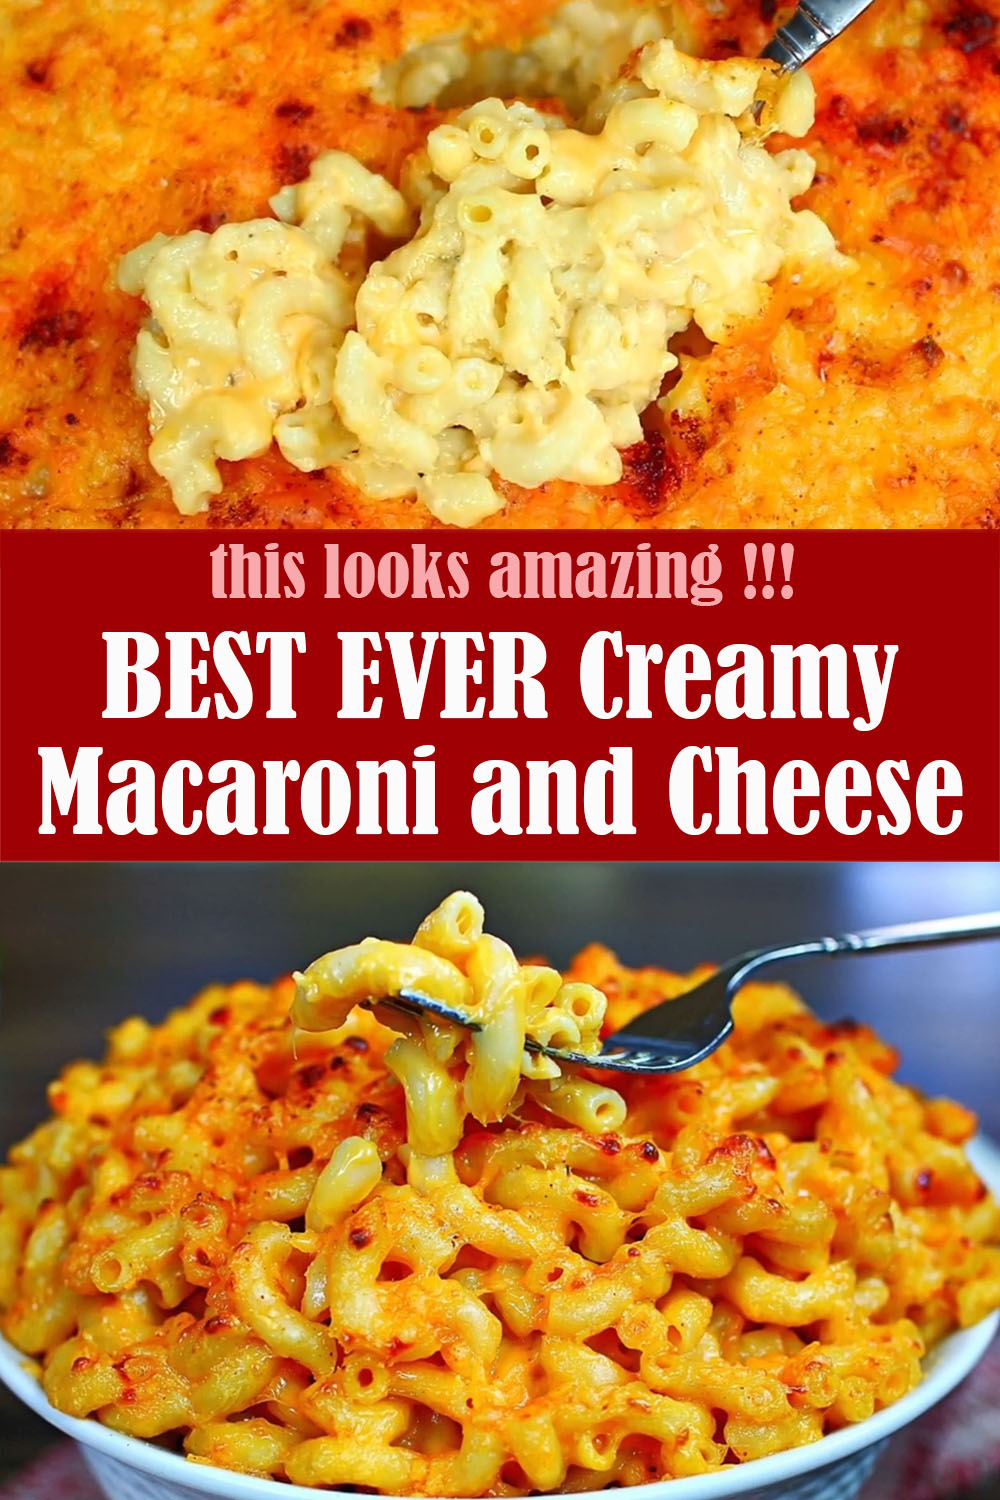 BEST EVER Creamy Macaroni and Cheese Recipe